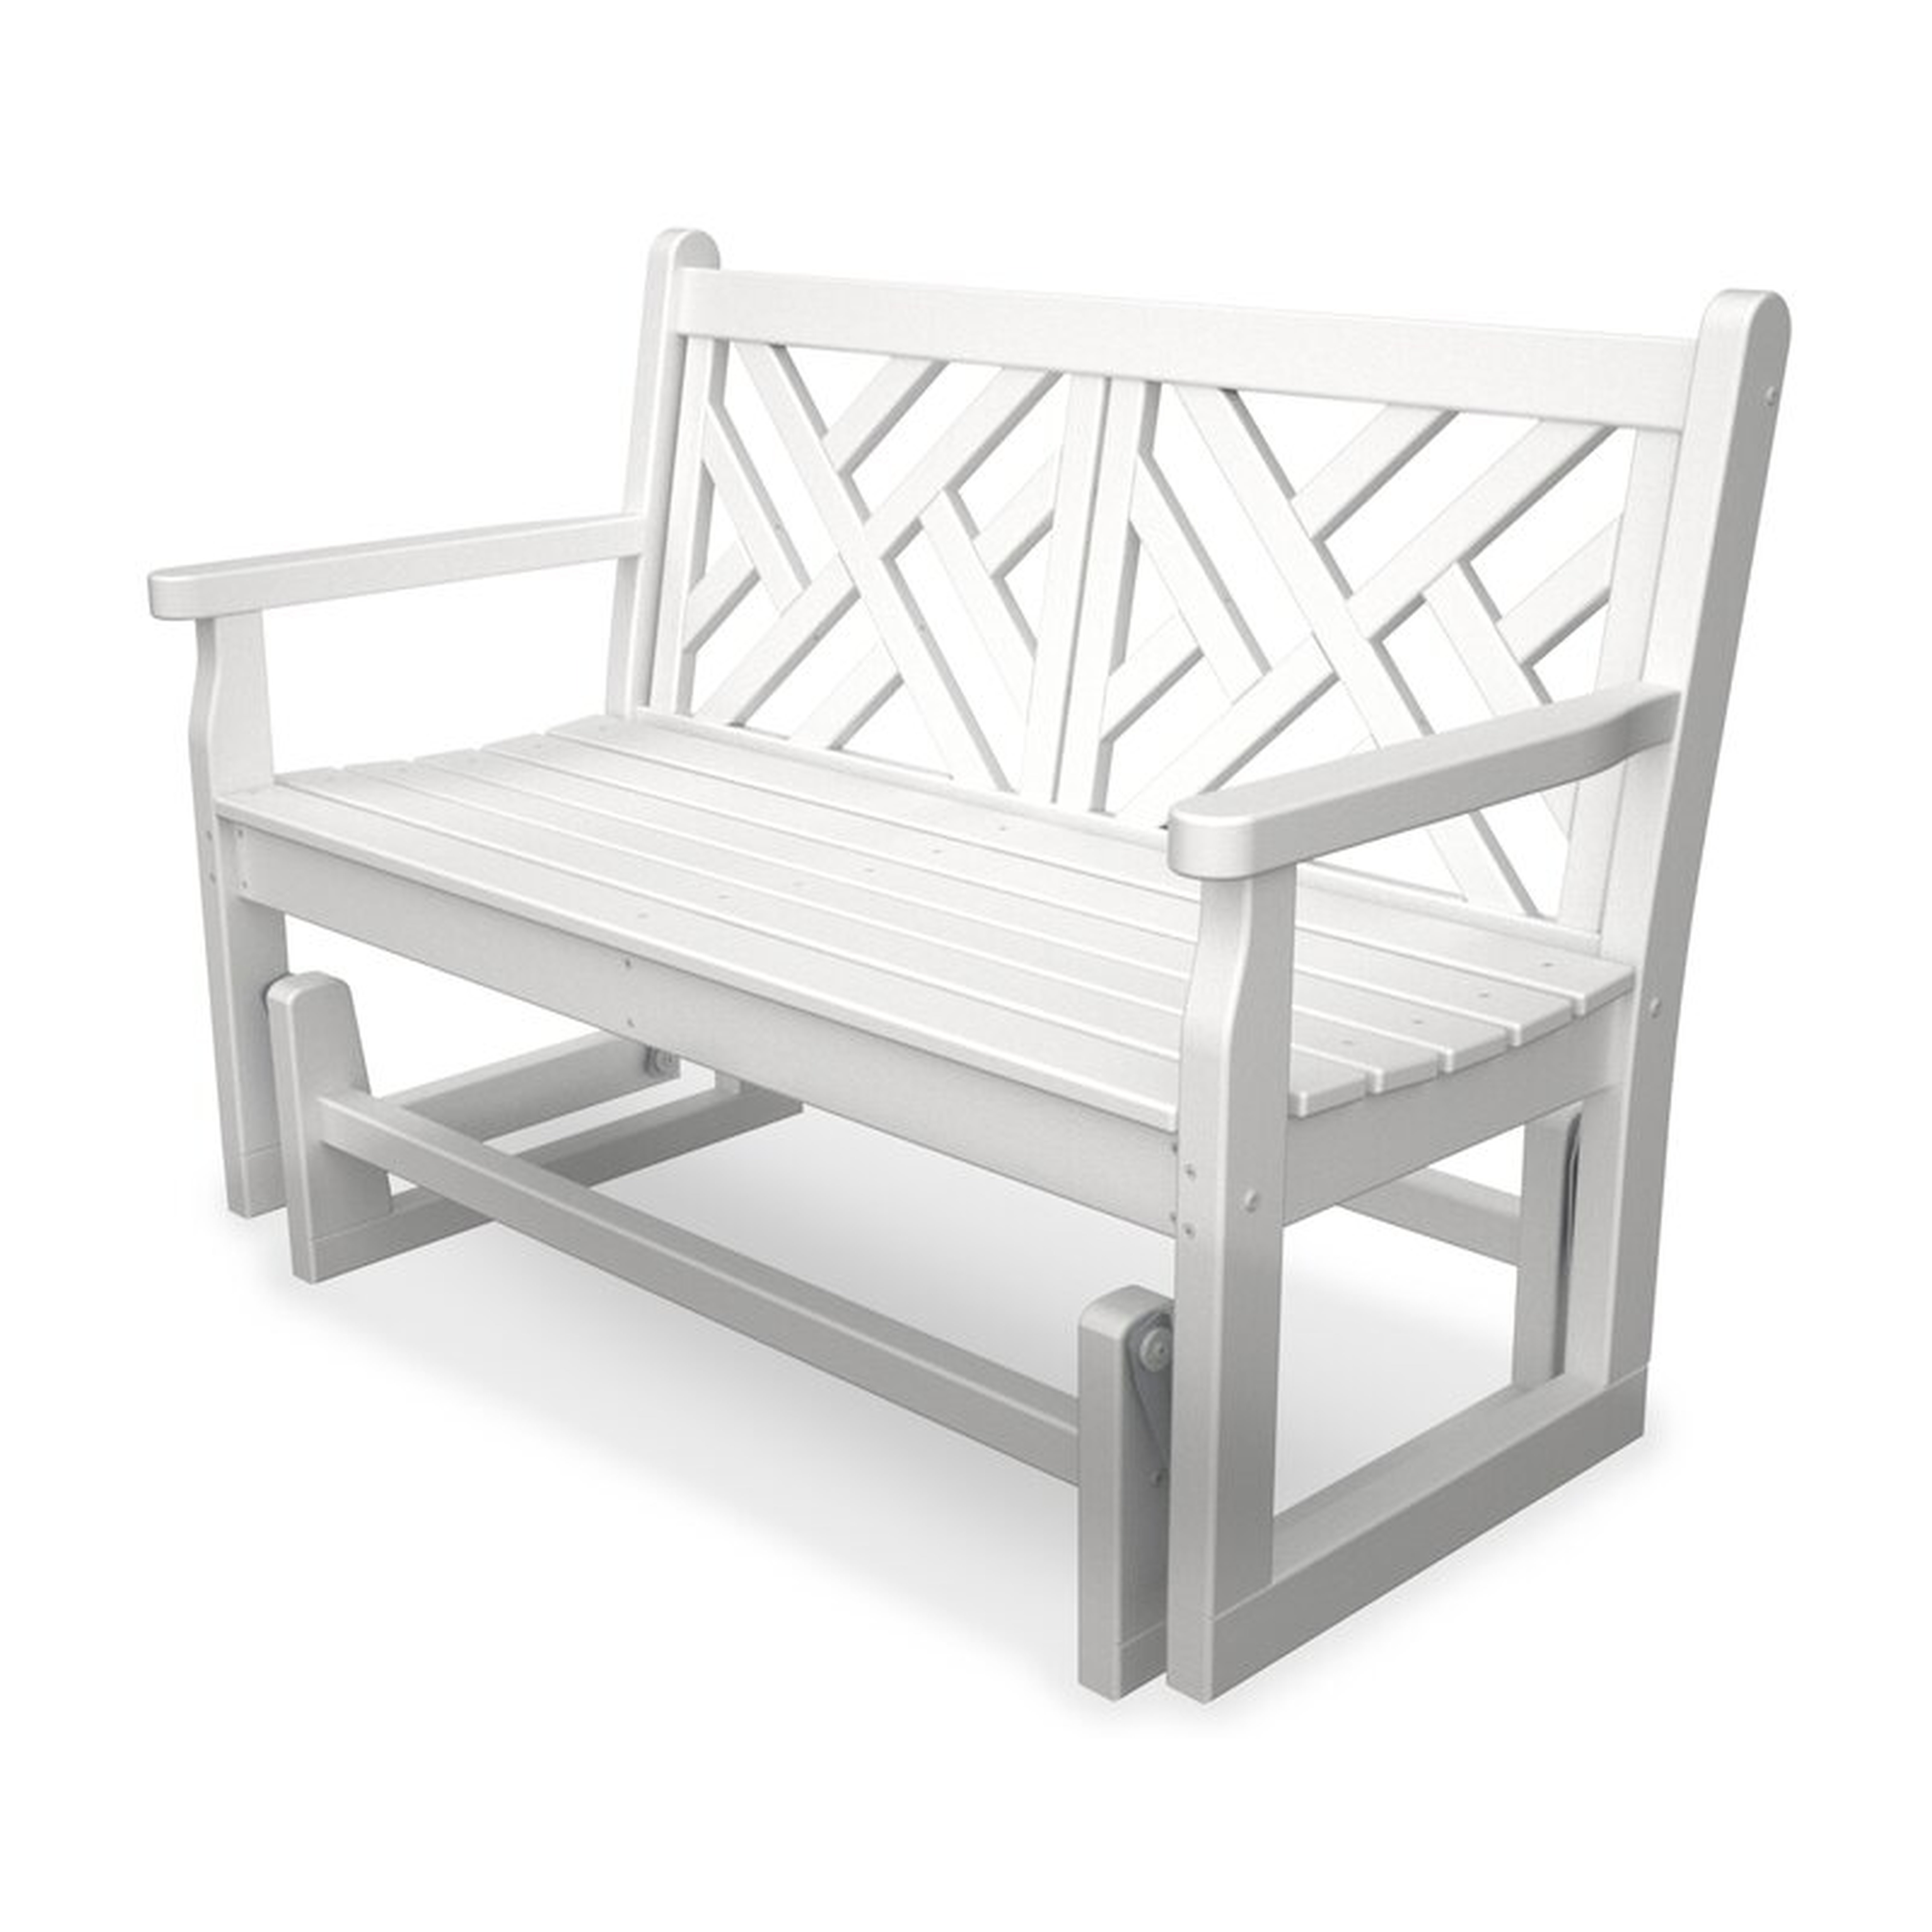 POLYWOOD® Chippendale Glider Bench in White - AllModern